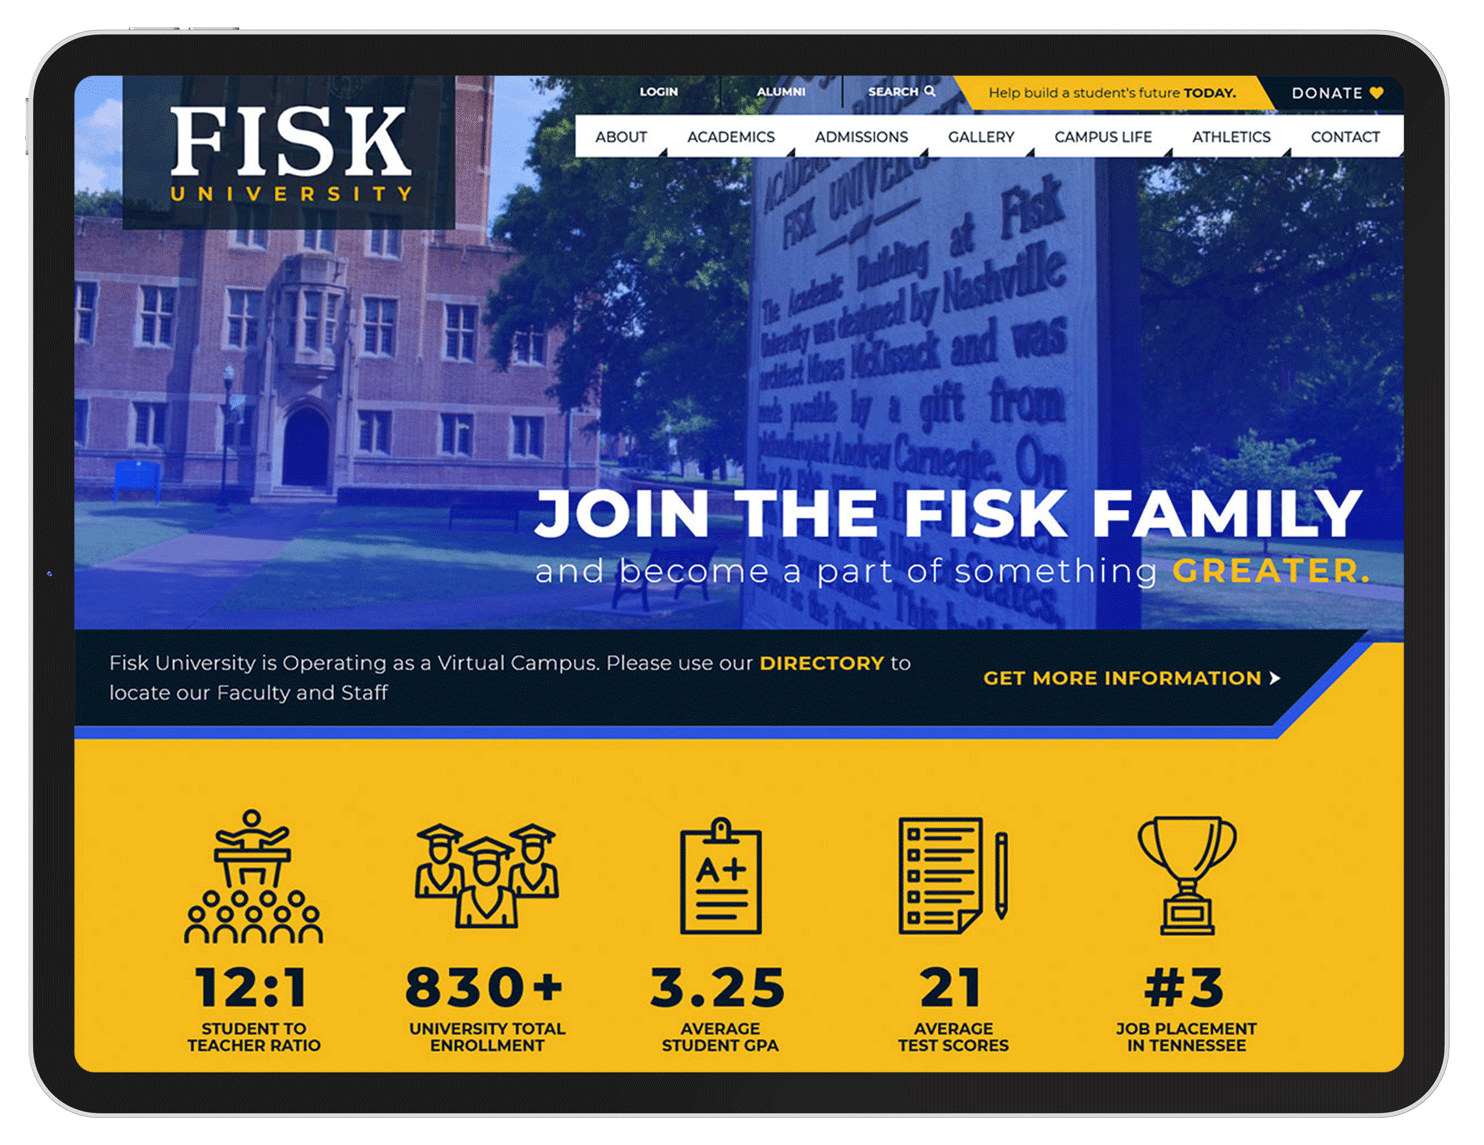 ipad tablet view of frisk university website design by the best web design company in nashville tn near brentwood